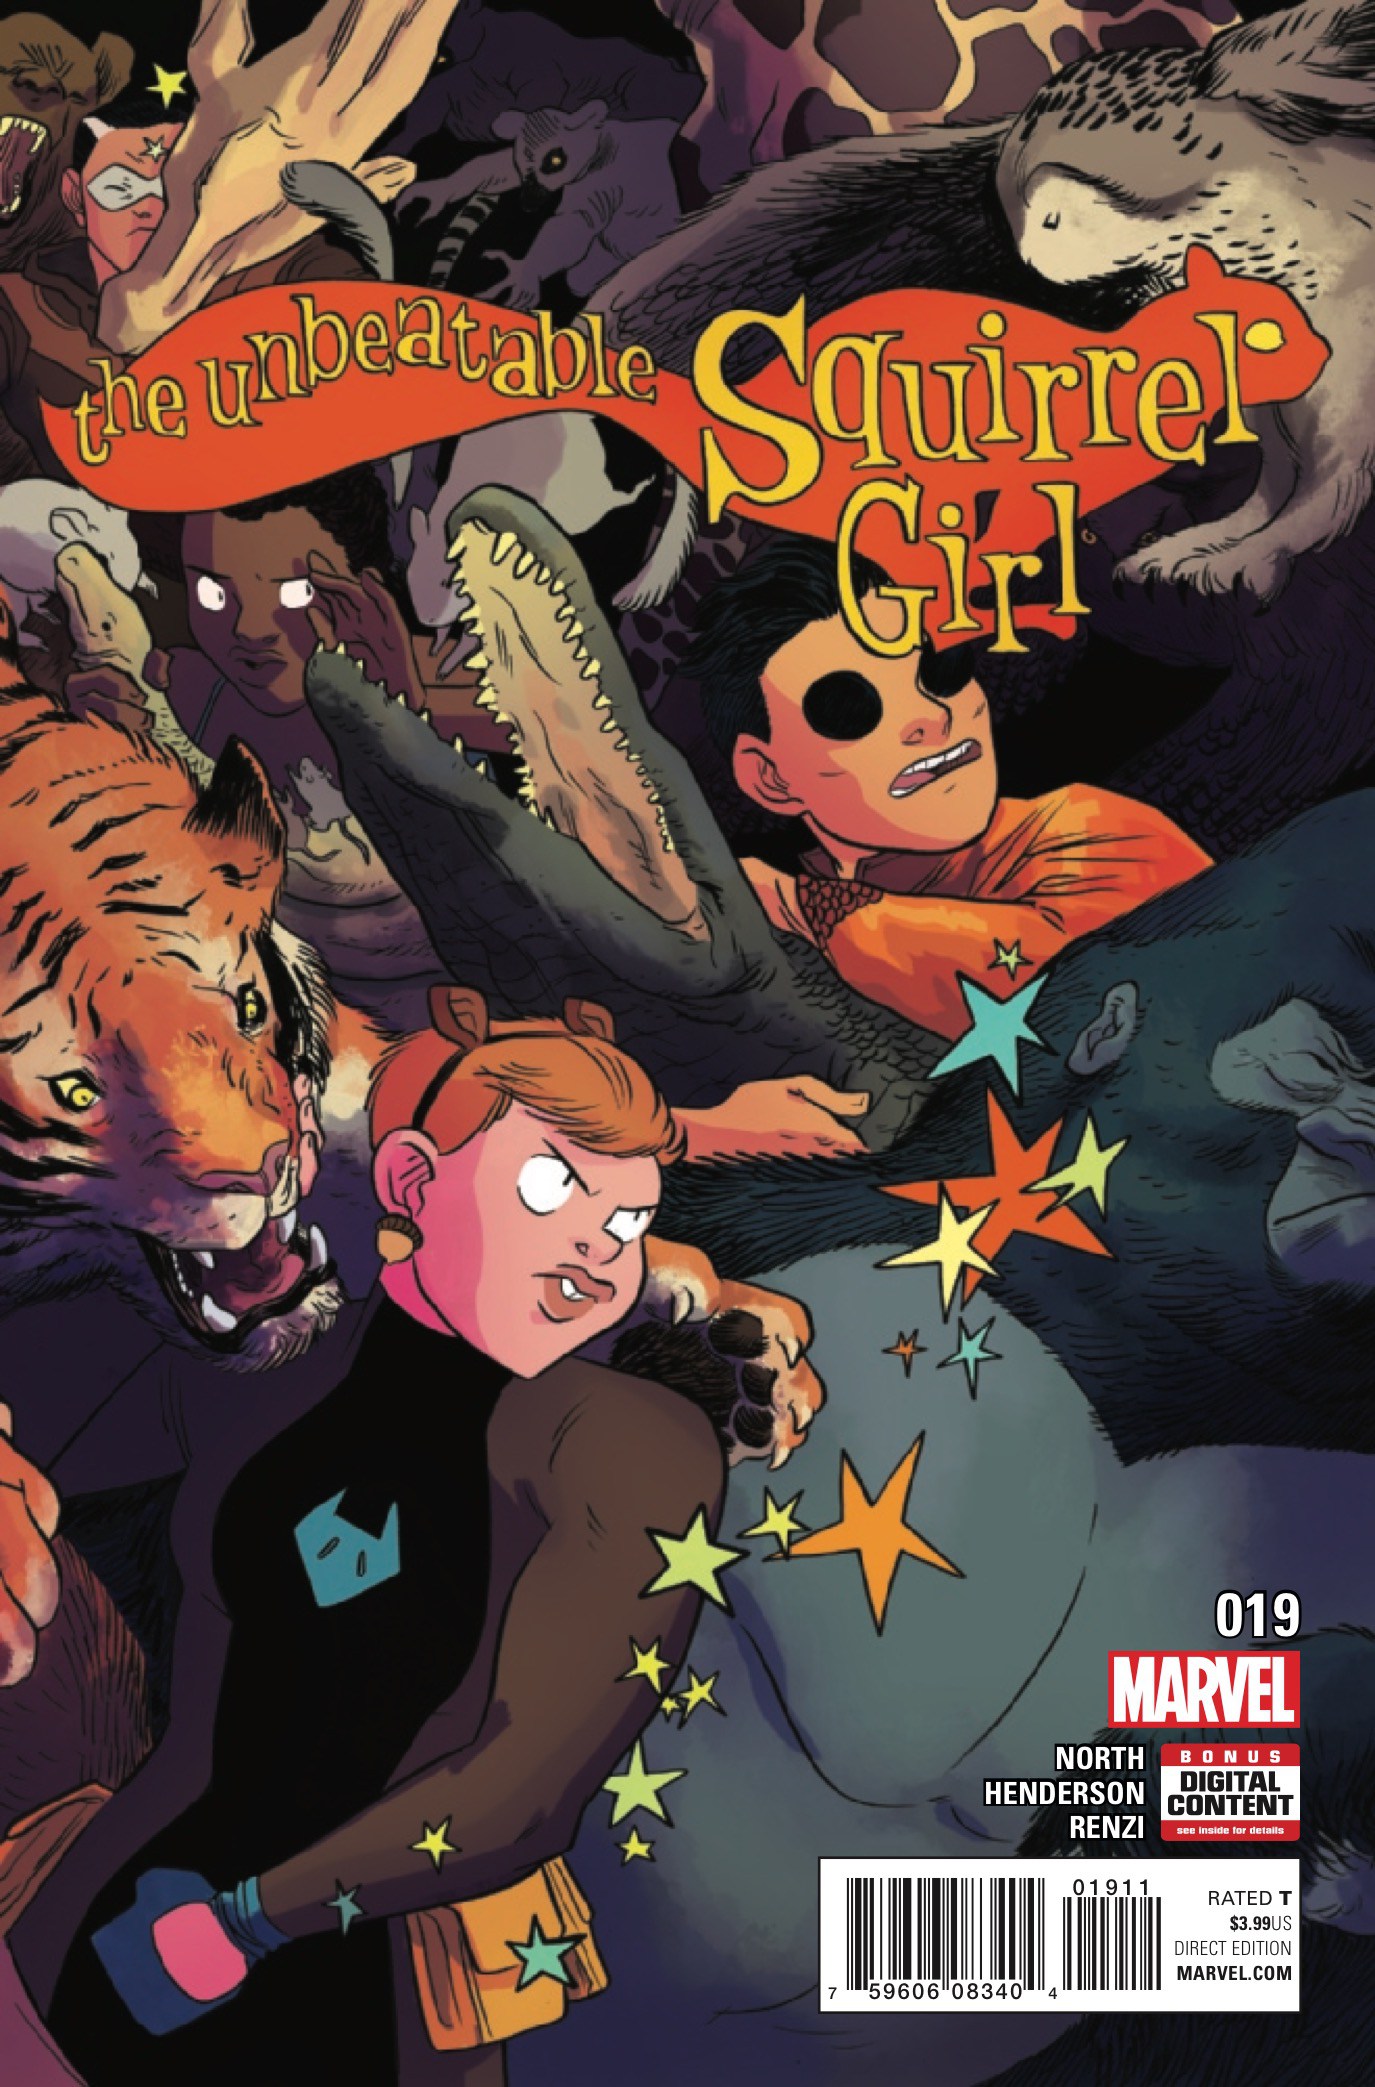 The Unbeatable Squirrel Girl #19 Review